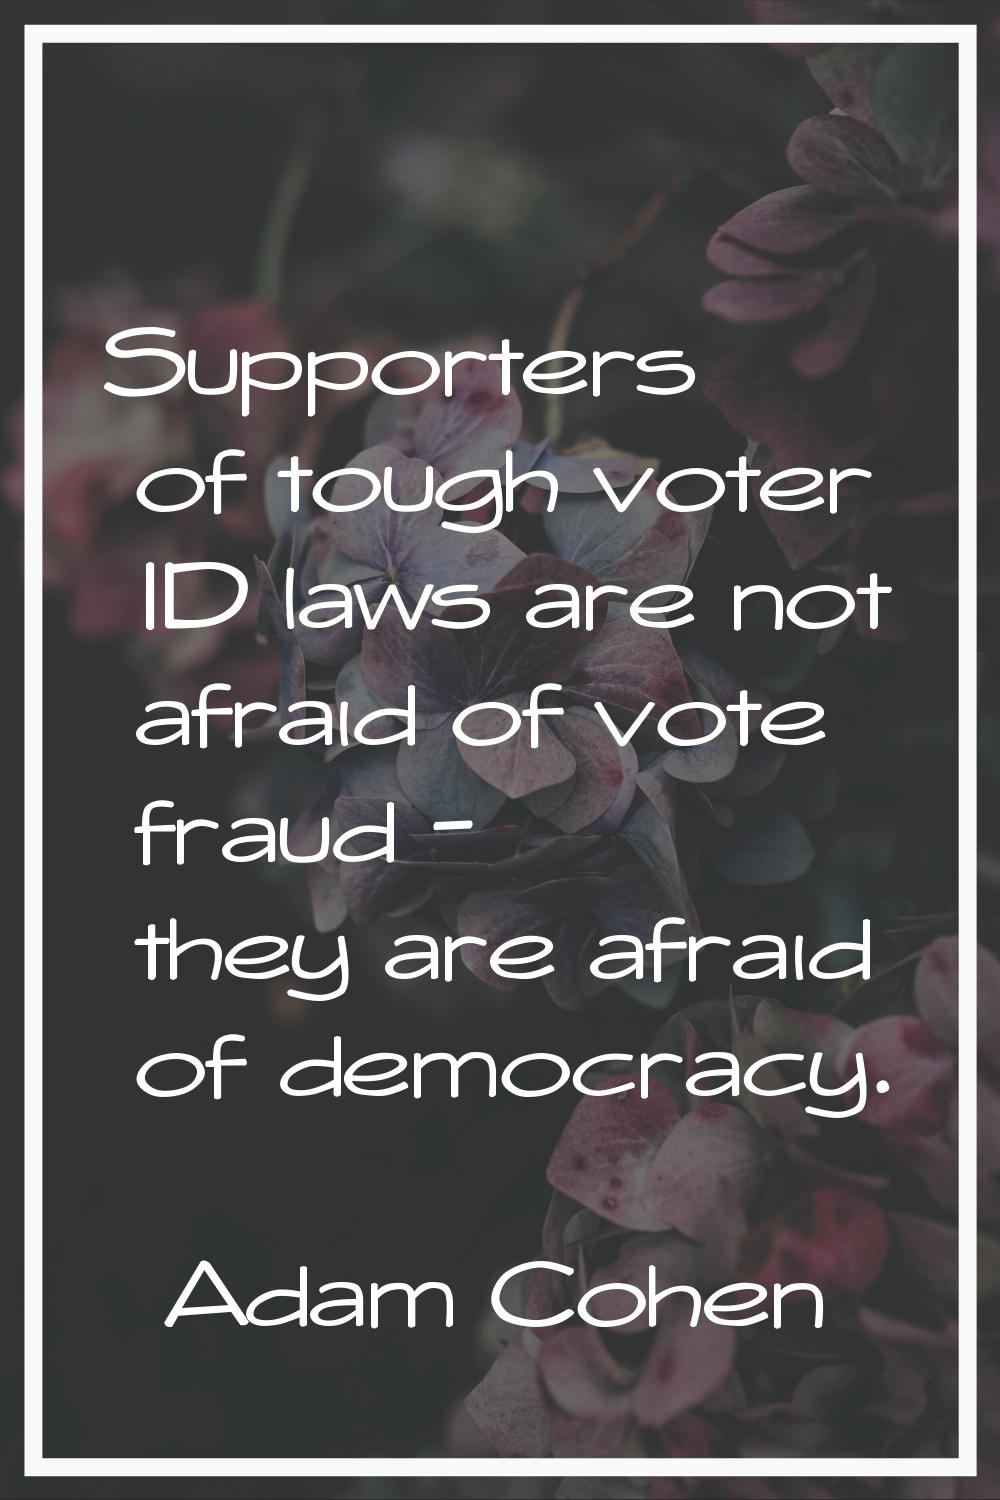 Supporters of tough voter ID laws are not afraid of vote fraud - they are afraid of democracy.